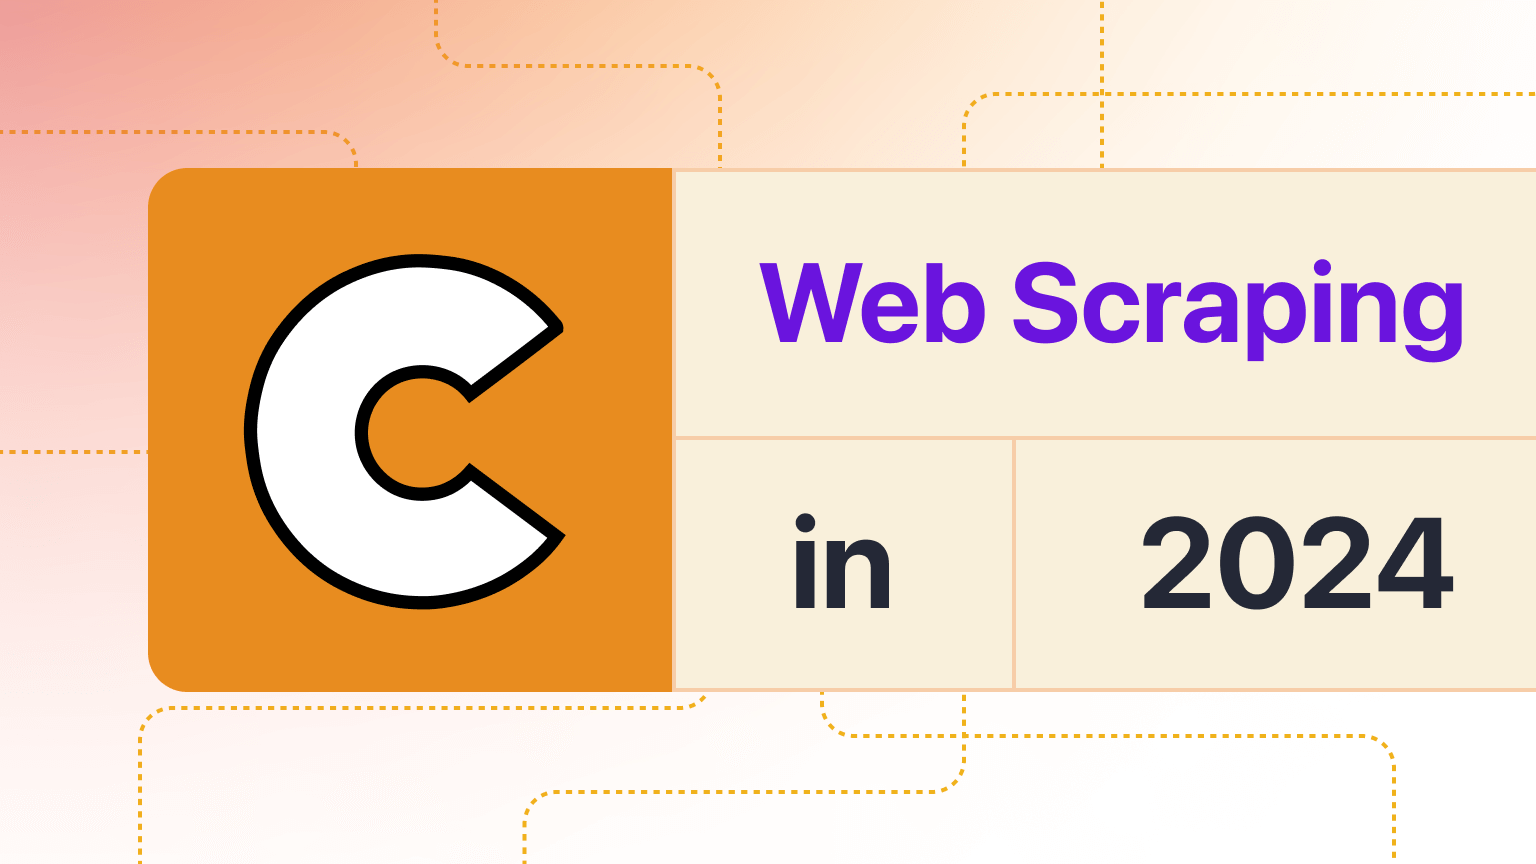 Web scraping with Cheerio